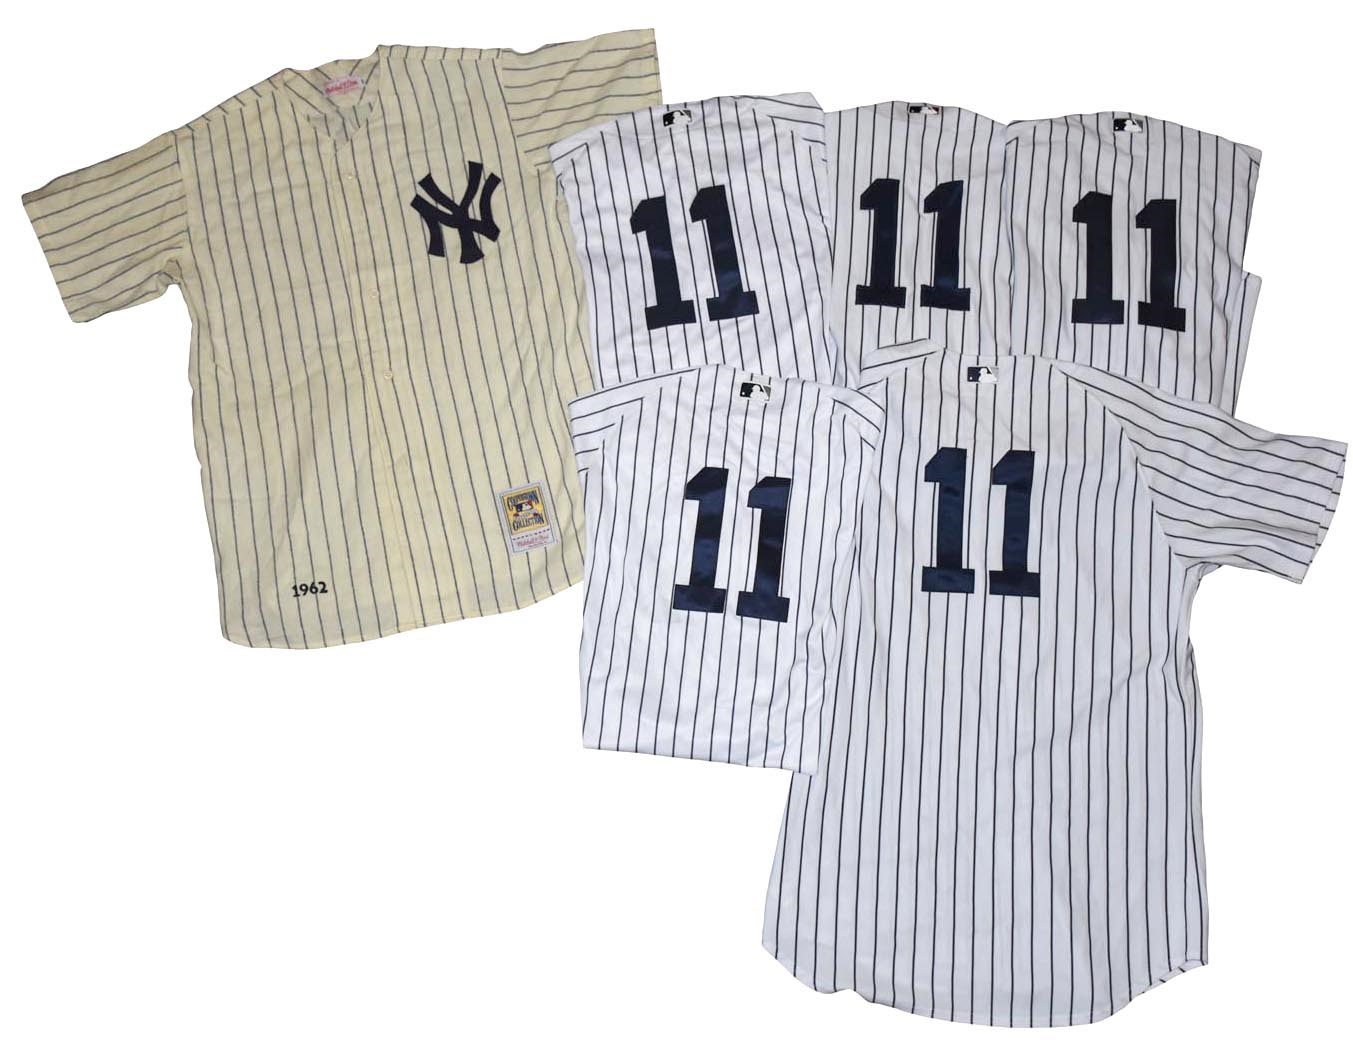 NY Yankees, Giants & Mets - Hector Lopez NY Yankees Uniform Collection (16 Pieces)